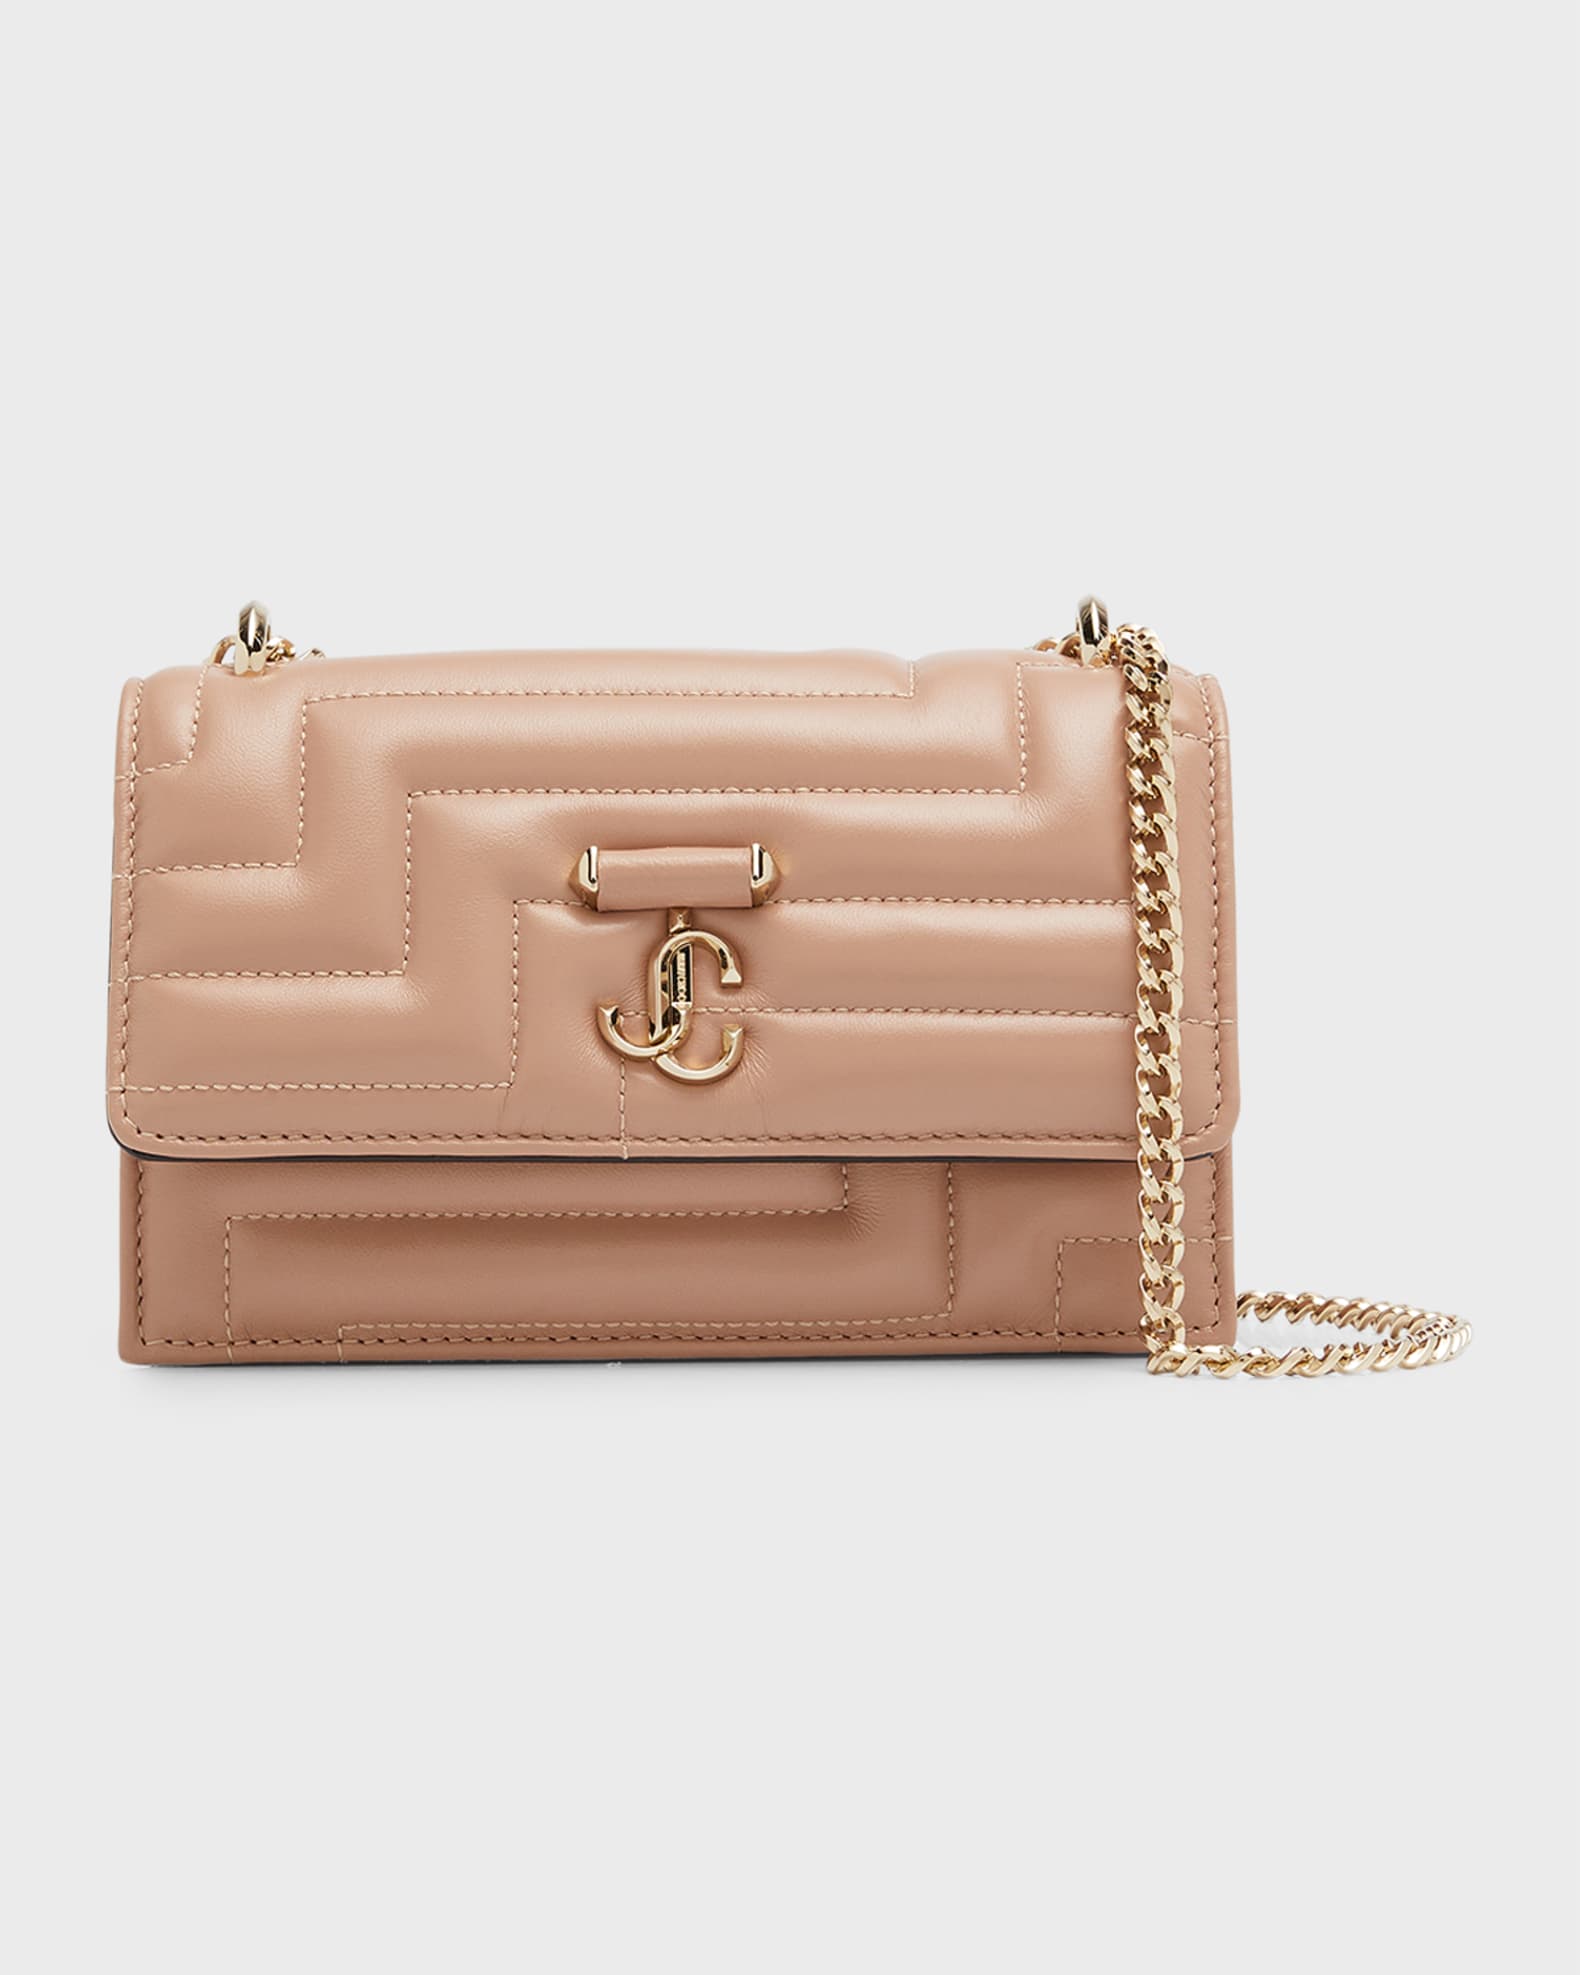 Jimmy Choo Bohemia Quilted Leather Chain Shoulder Bag | Neiman Marcus